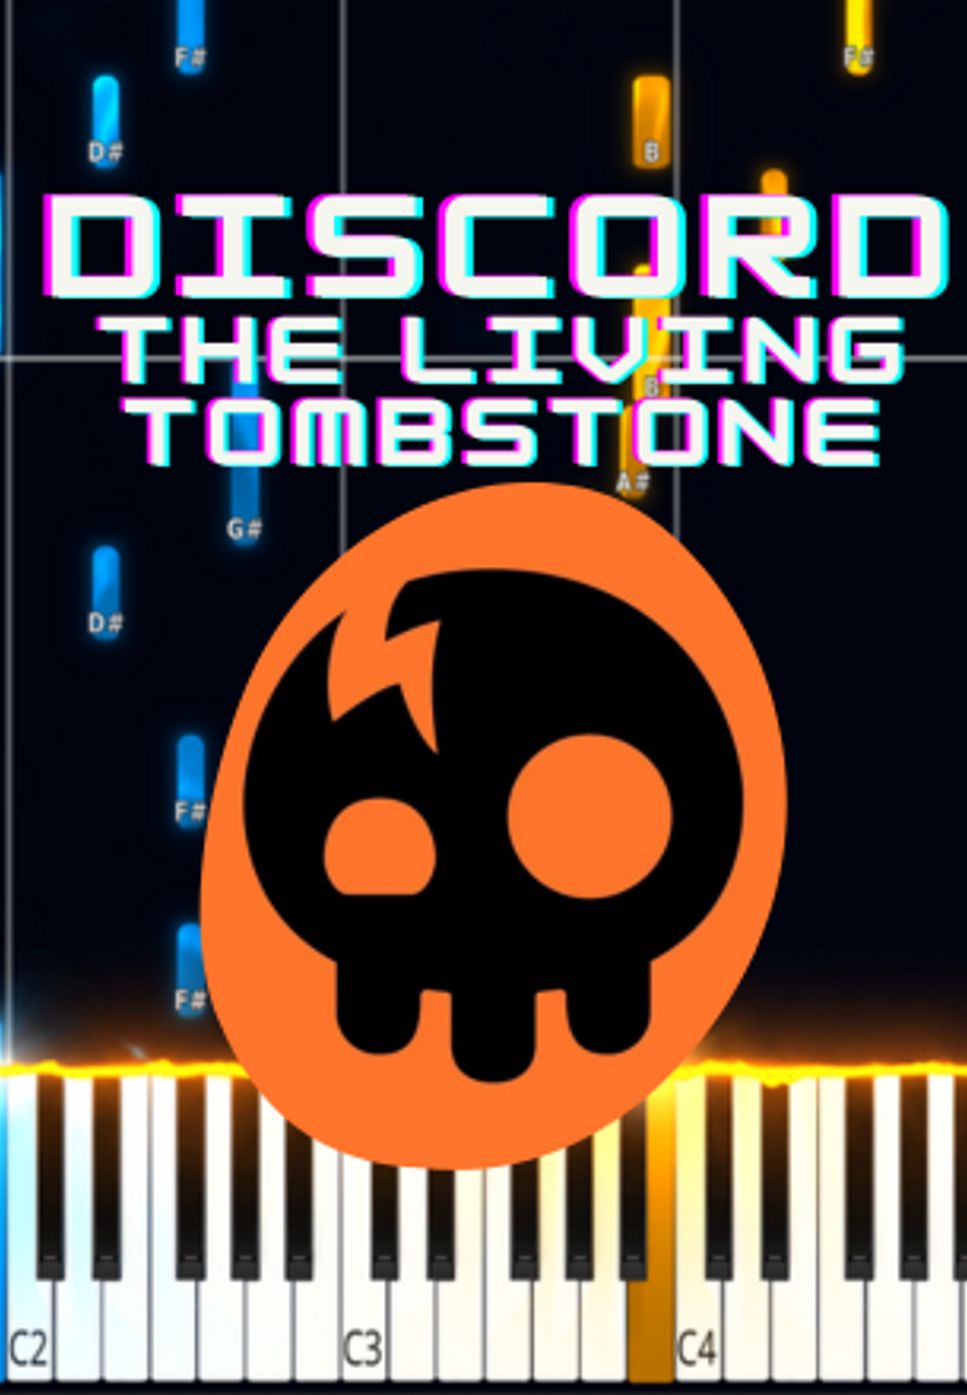 The Living Tombstone - Discord by Marco D.